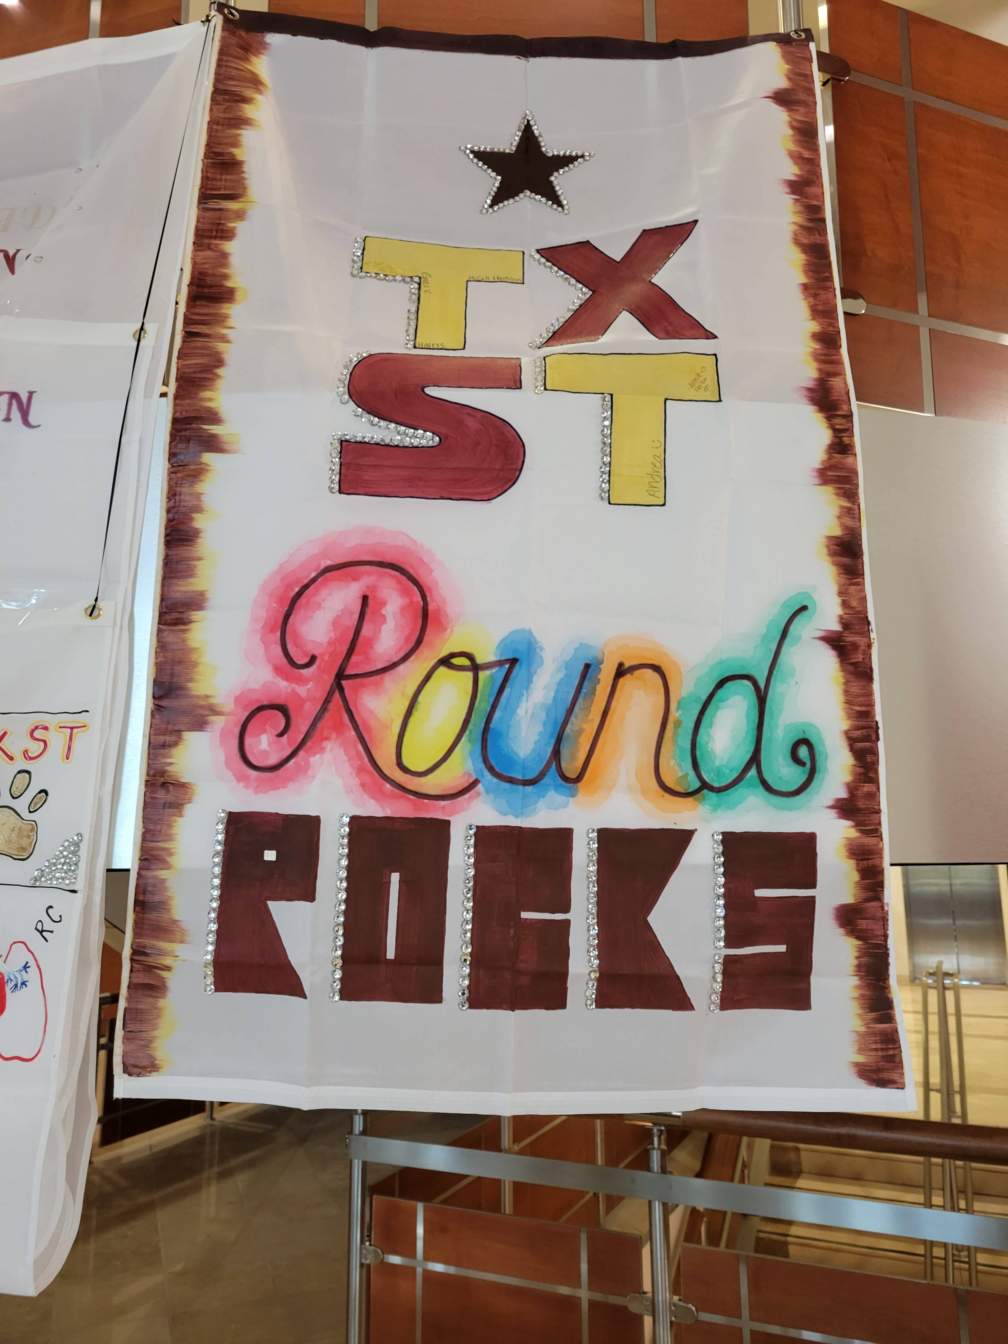 Homecoming Banner reading "TXST Round Rocks"